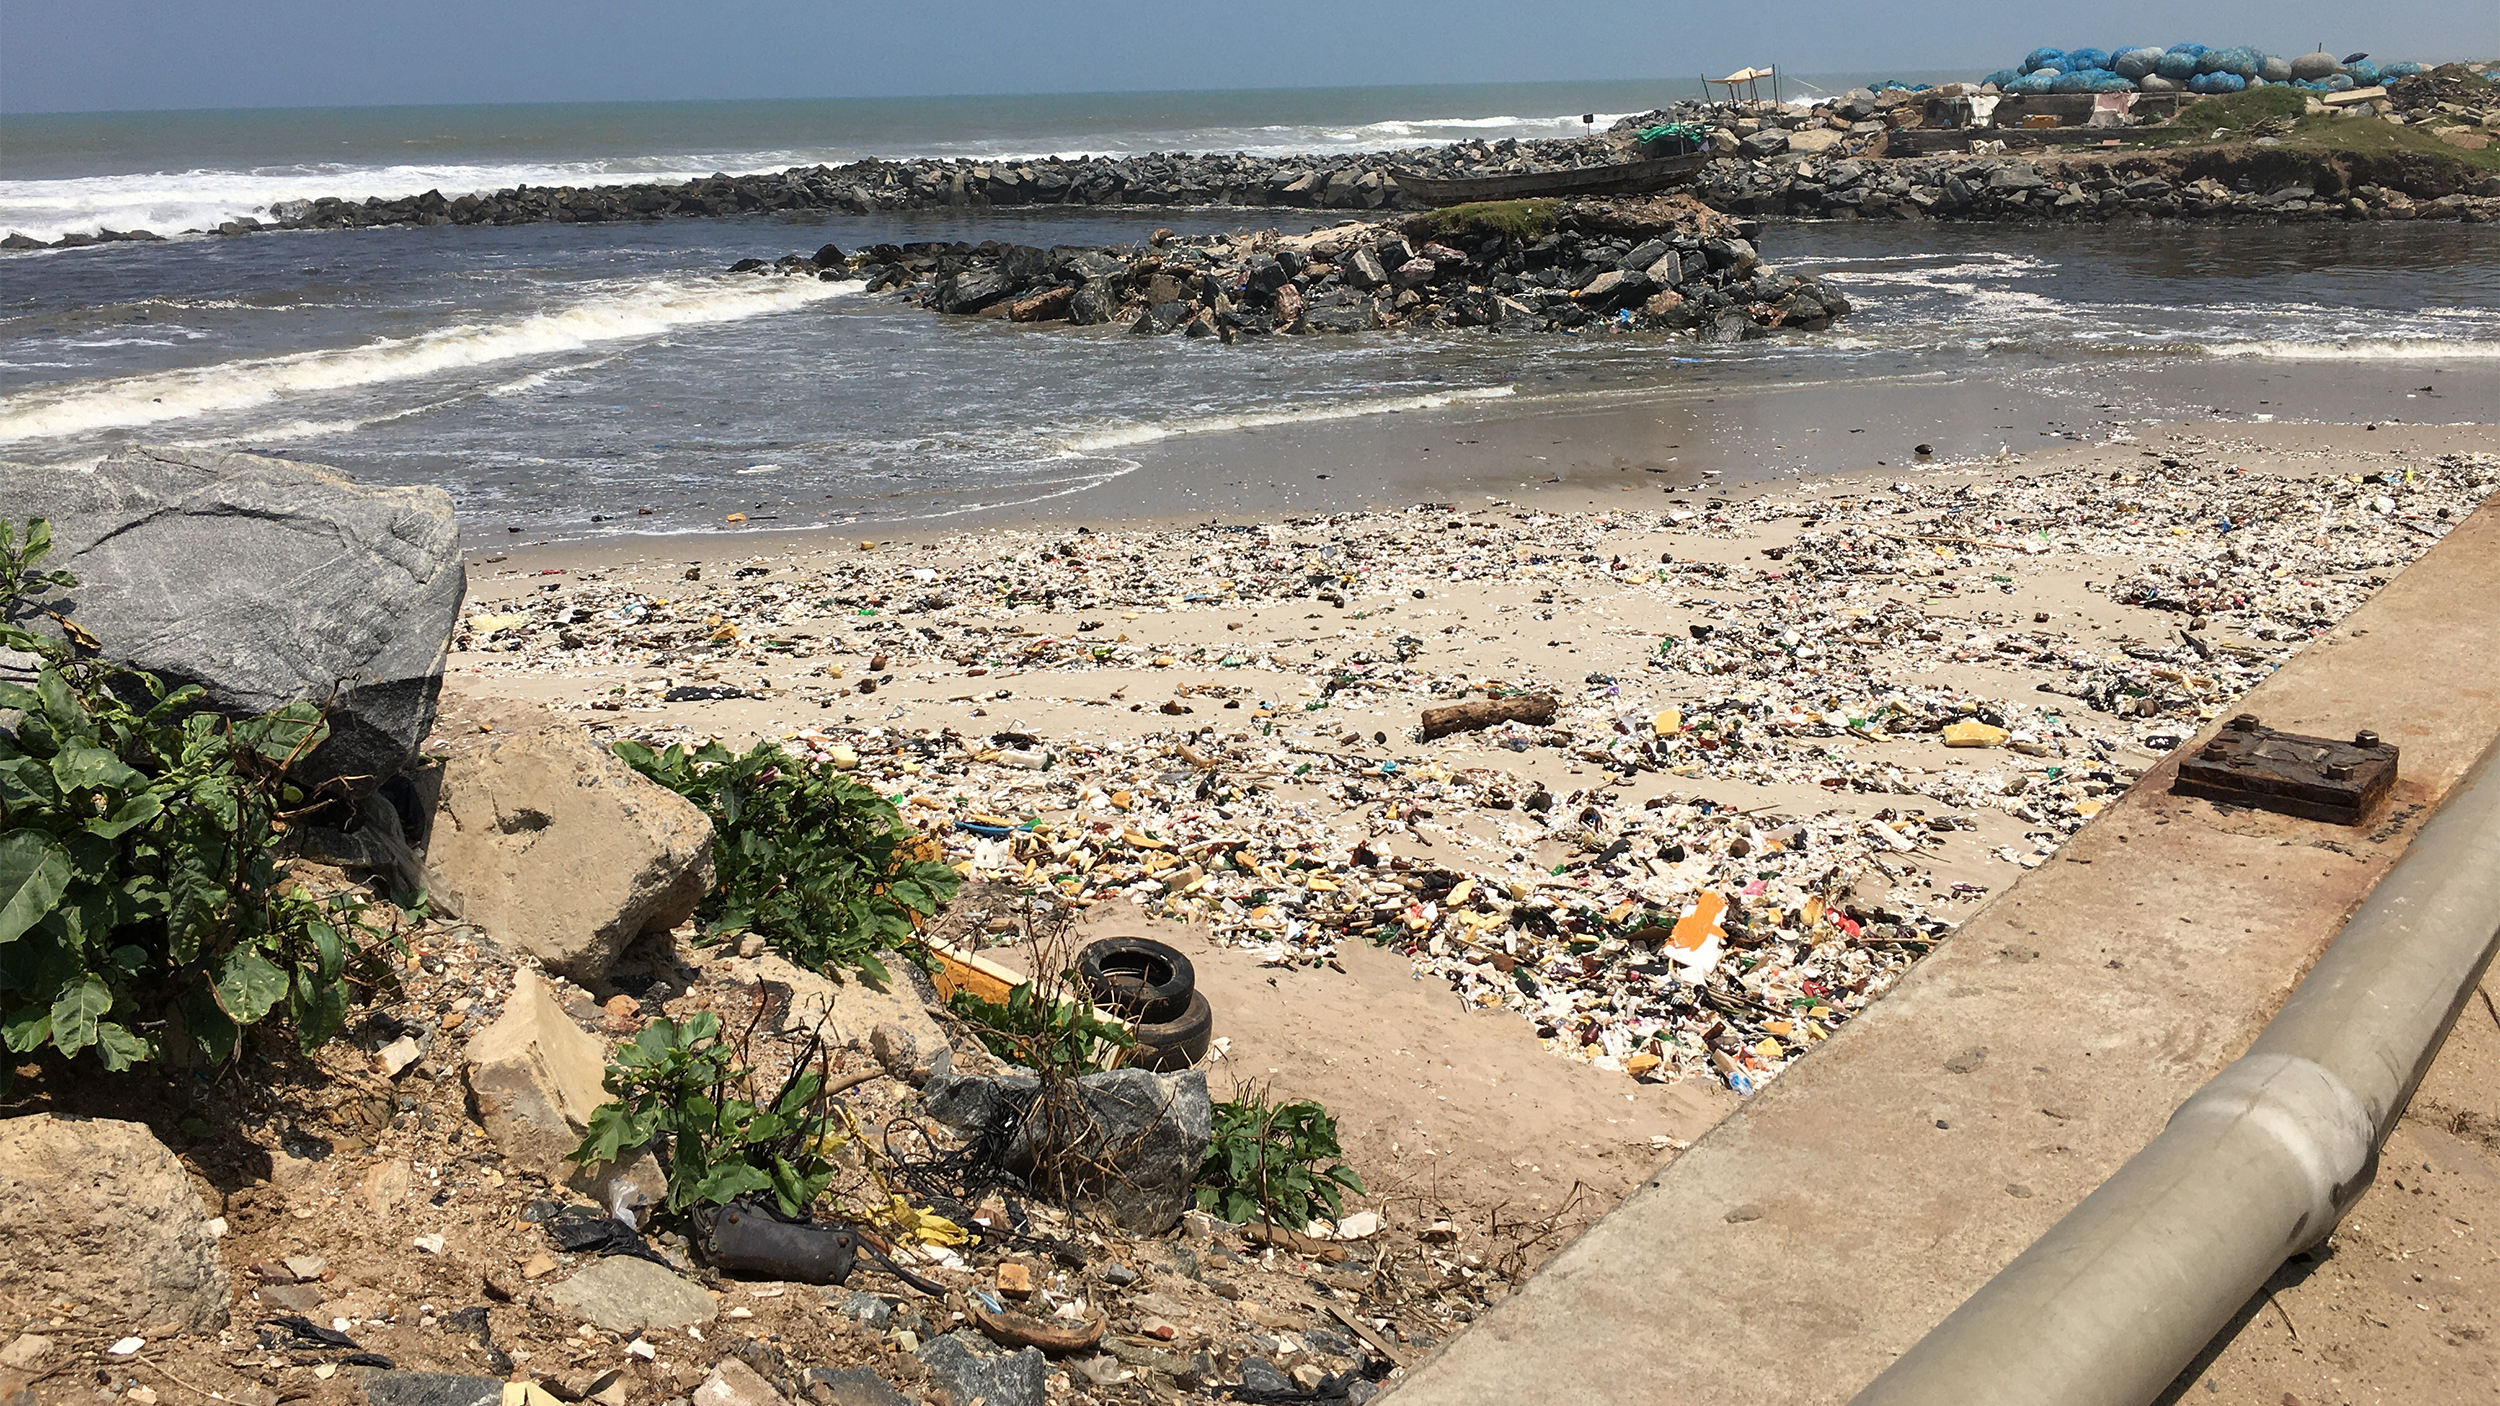 Plastic pollution, Korle lagoon, outlet to ocean